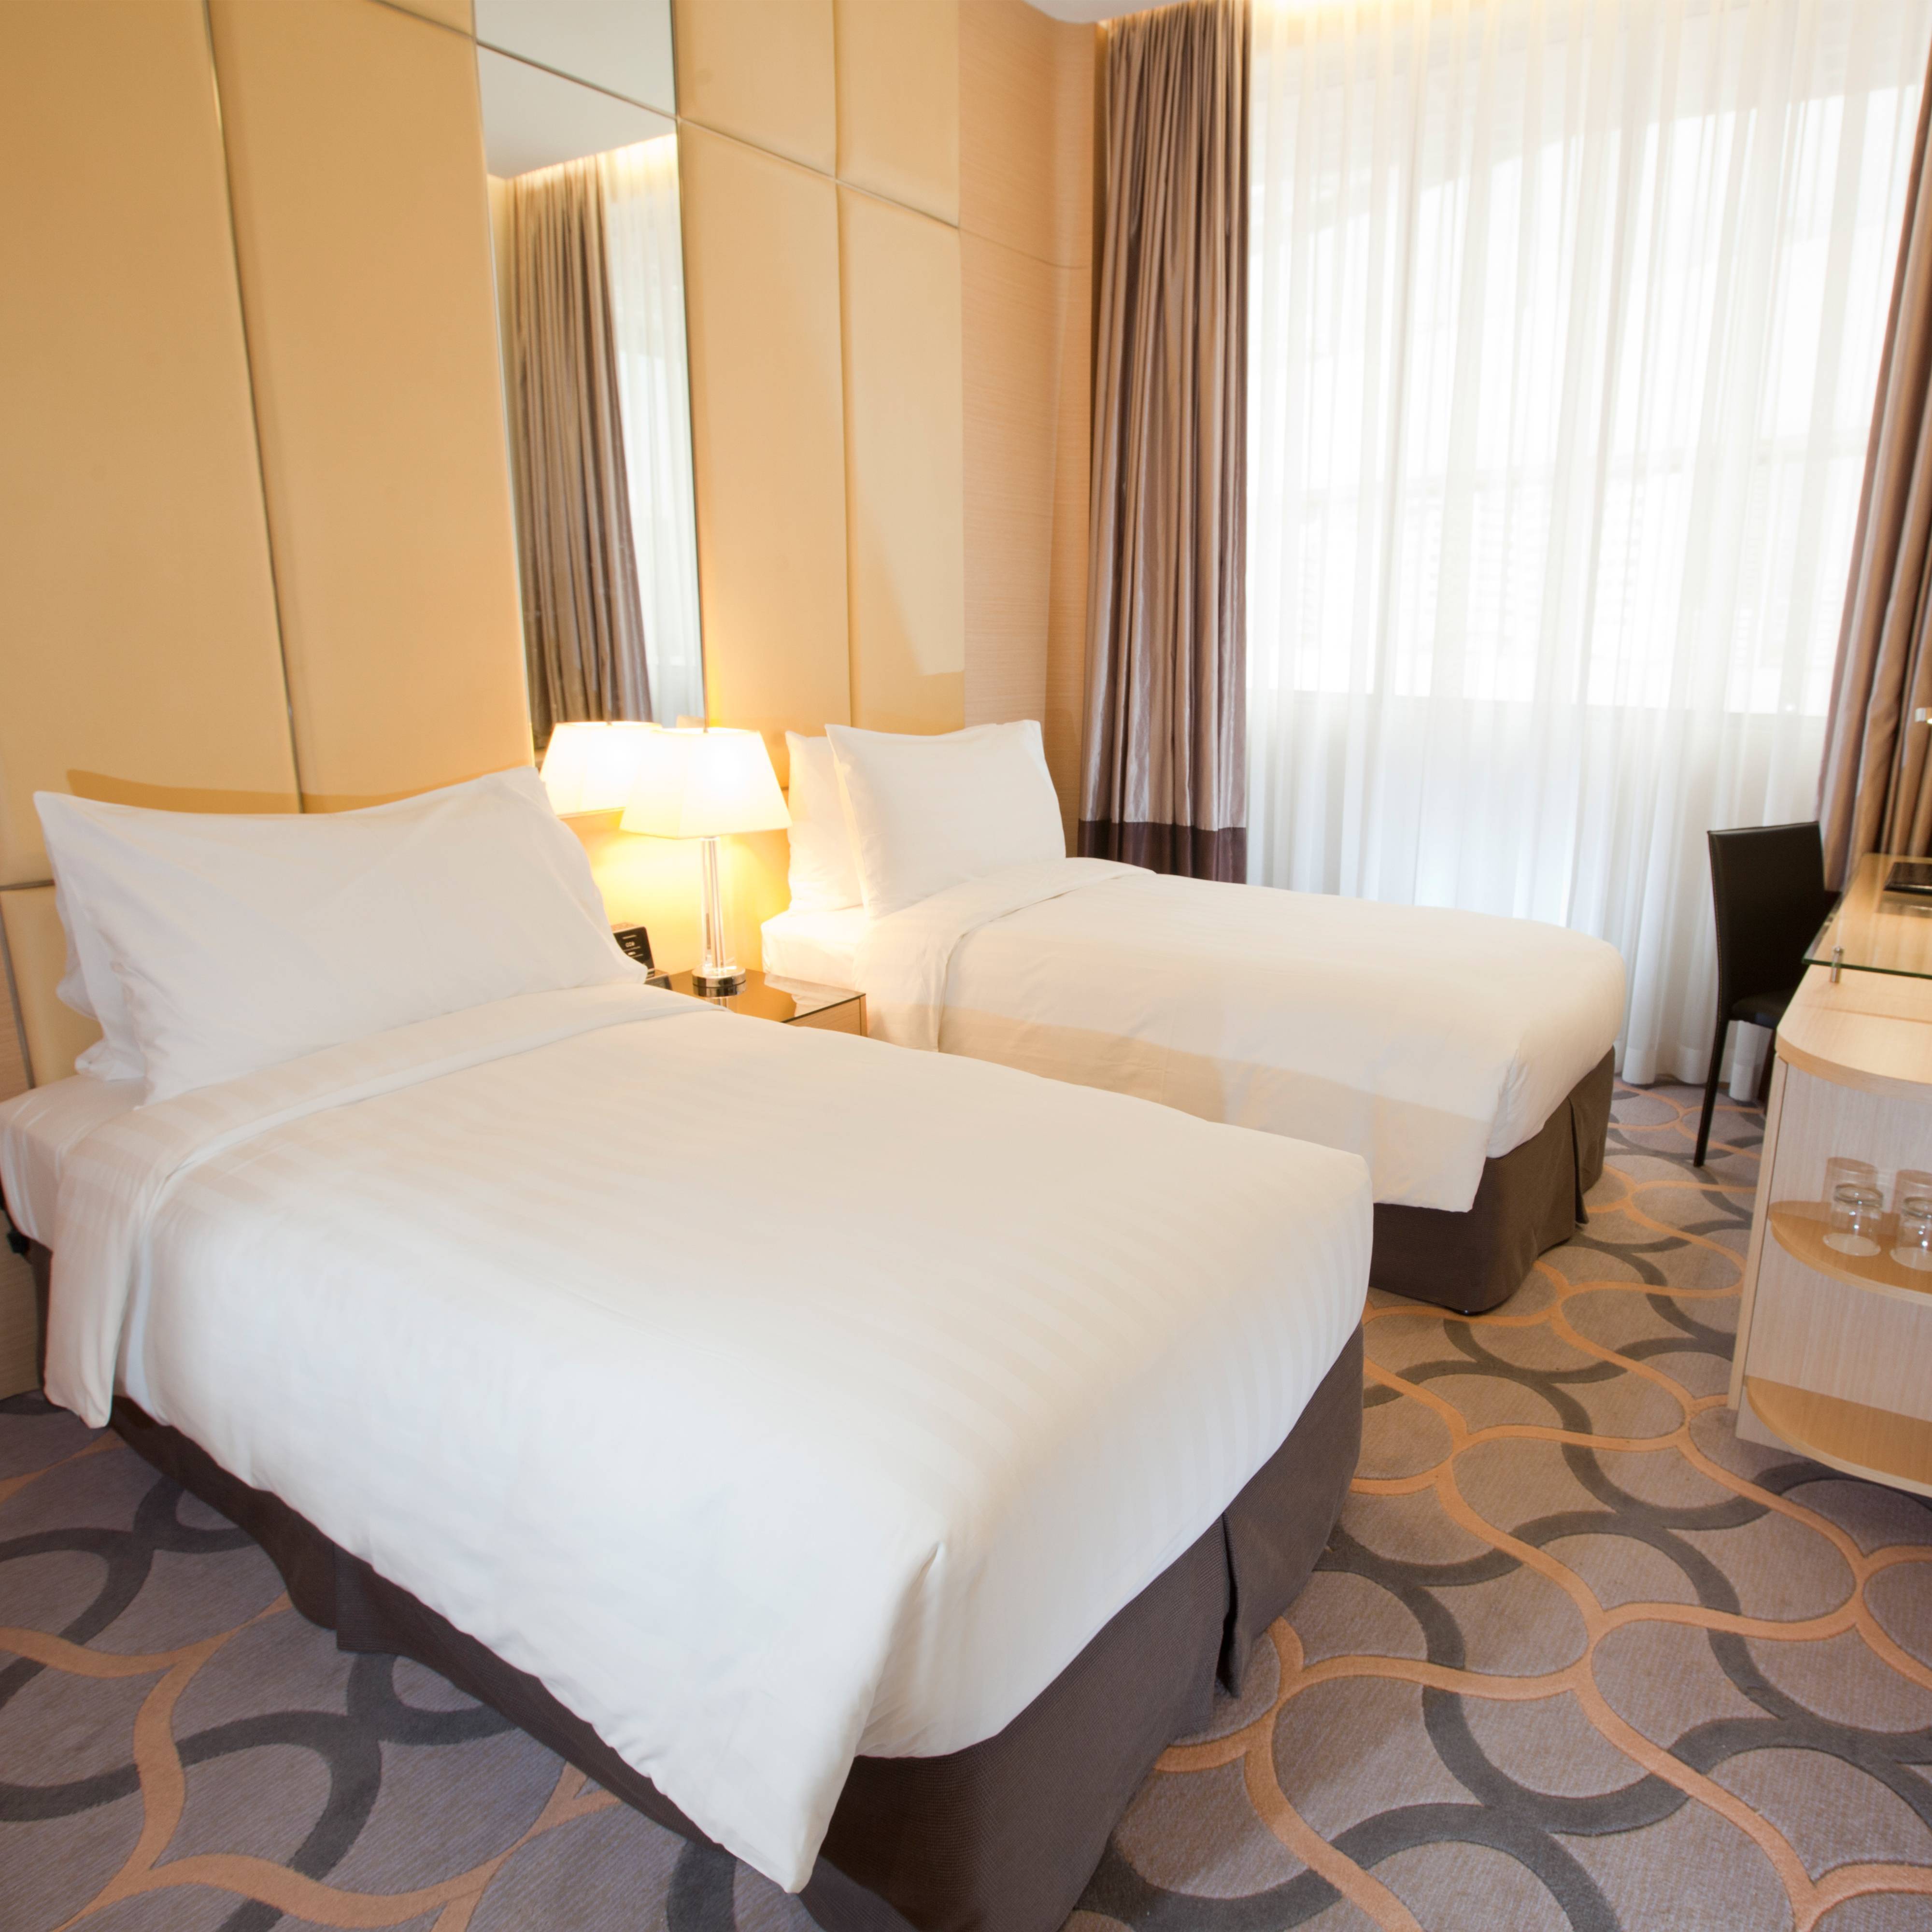 The inviting, modern setting of the Deluxe Room